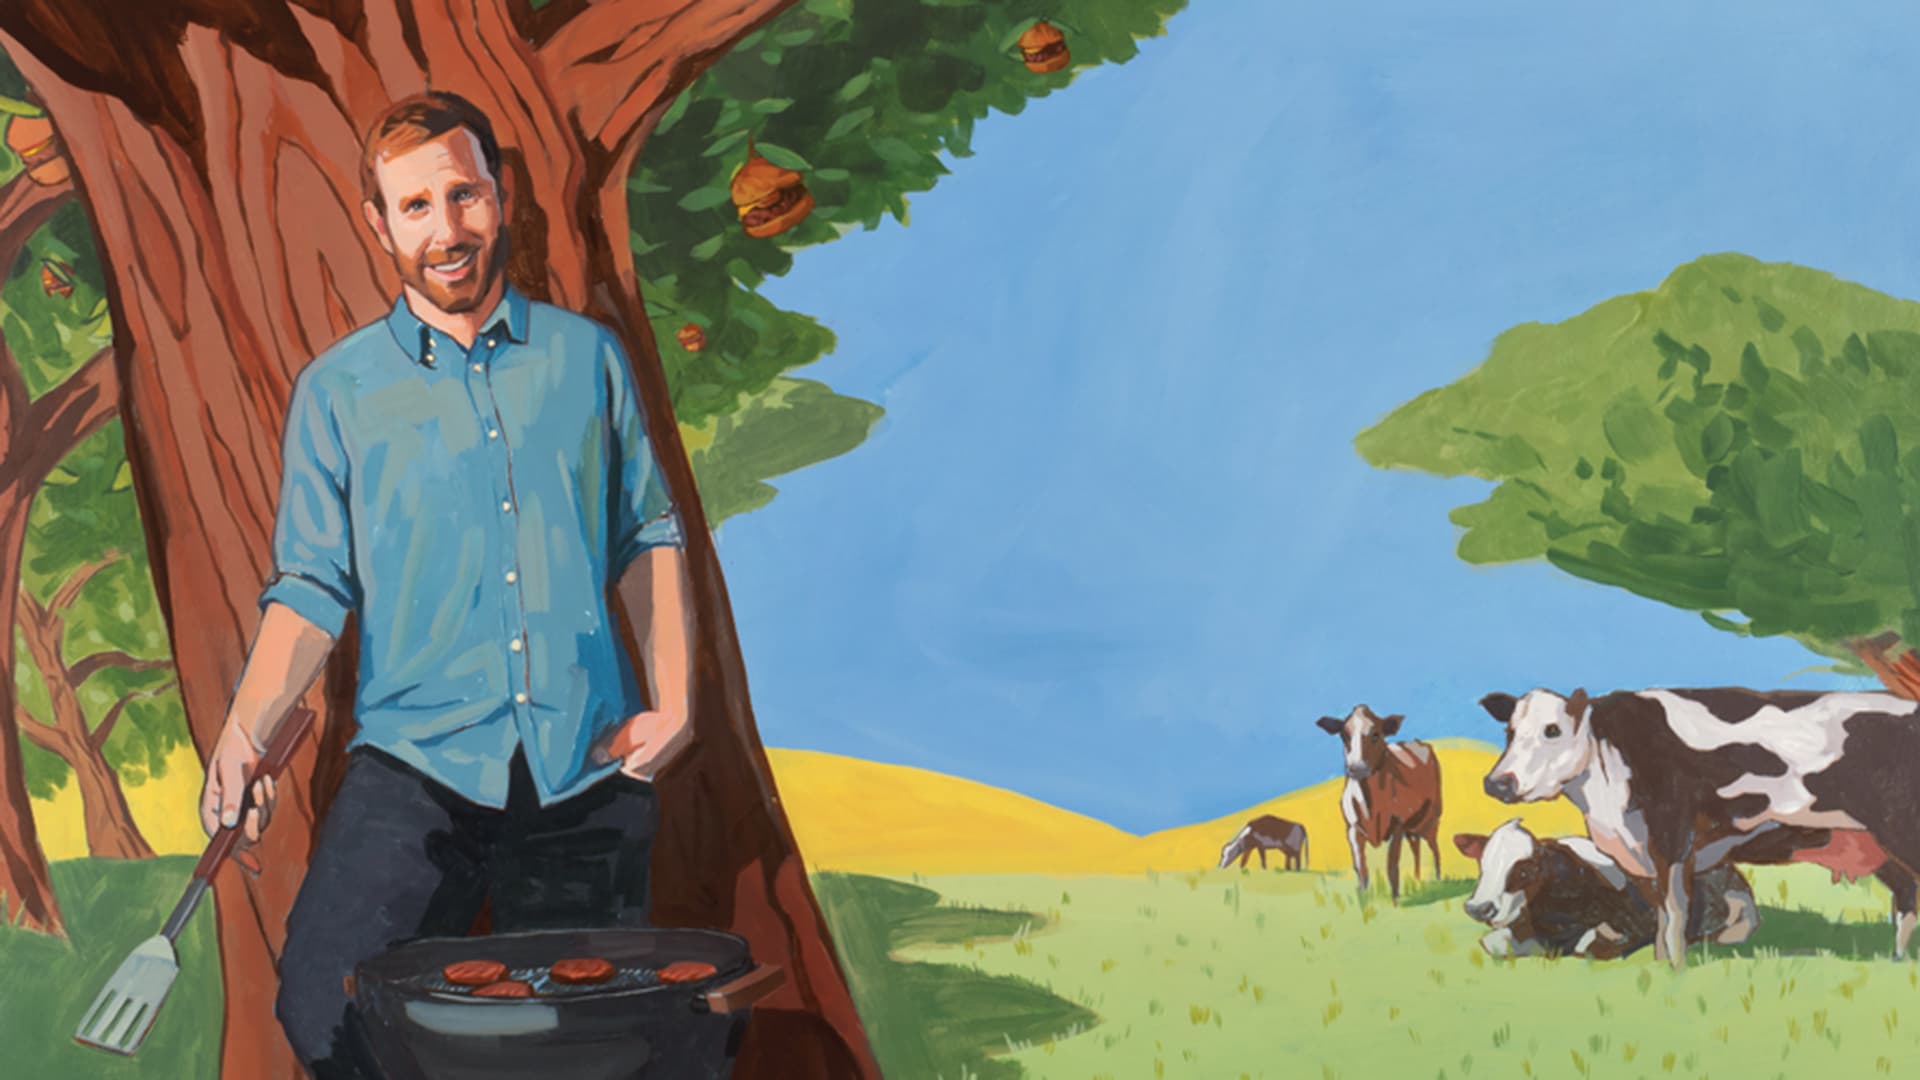 Illustration of Ethan Brown grilling burgers, surrounded by cows and burgers growing on trees